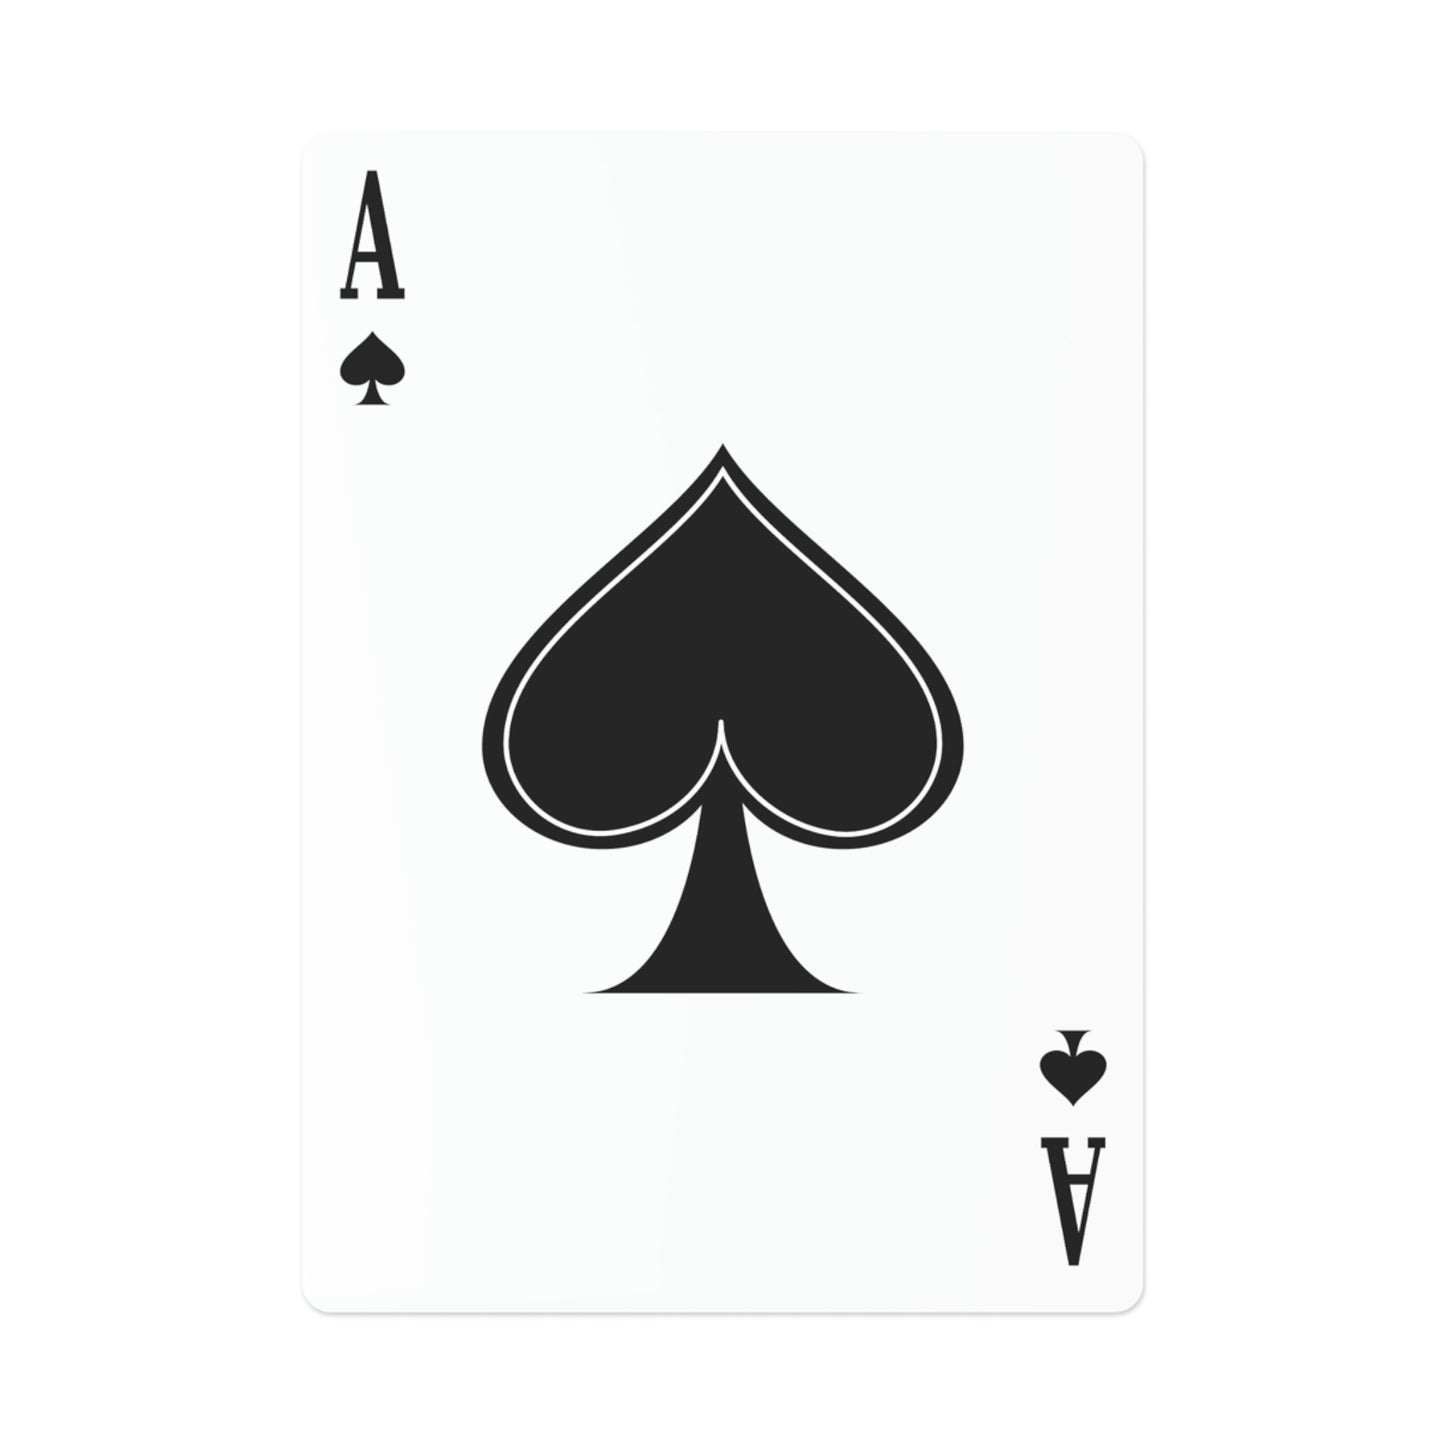 Without Question - Playing Cards